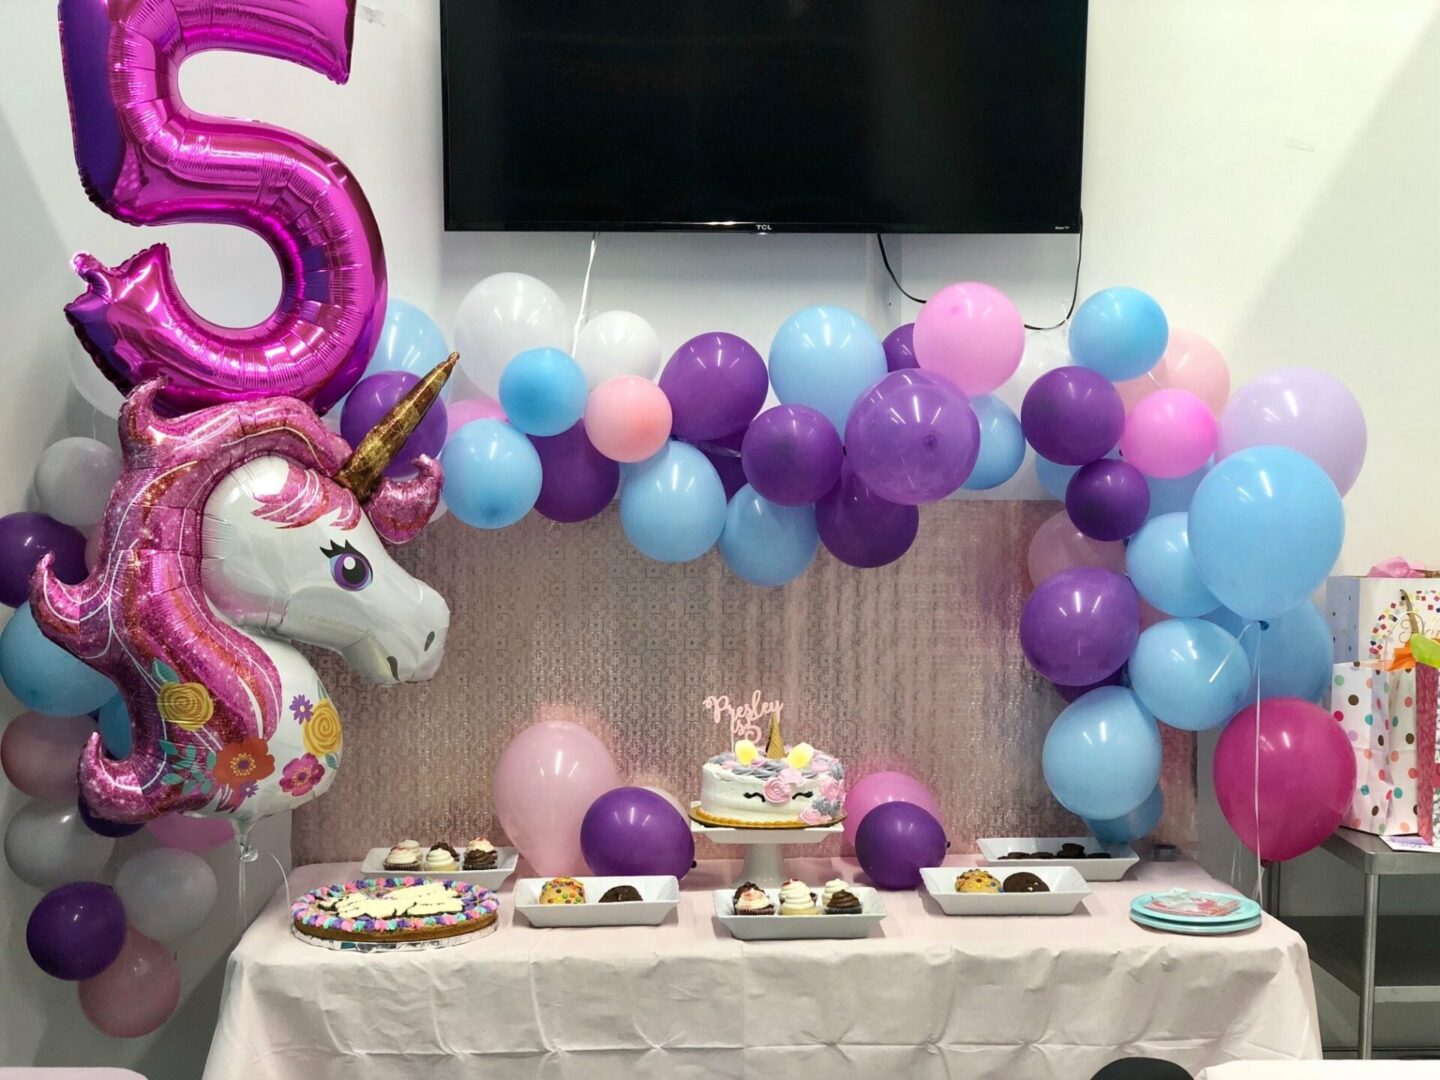 A table with balloons and cake on it